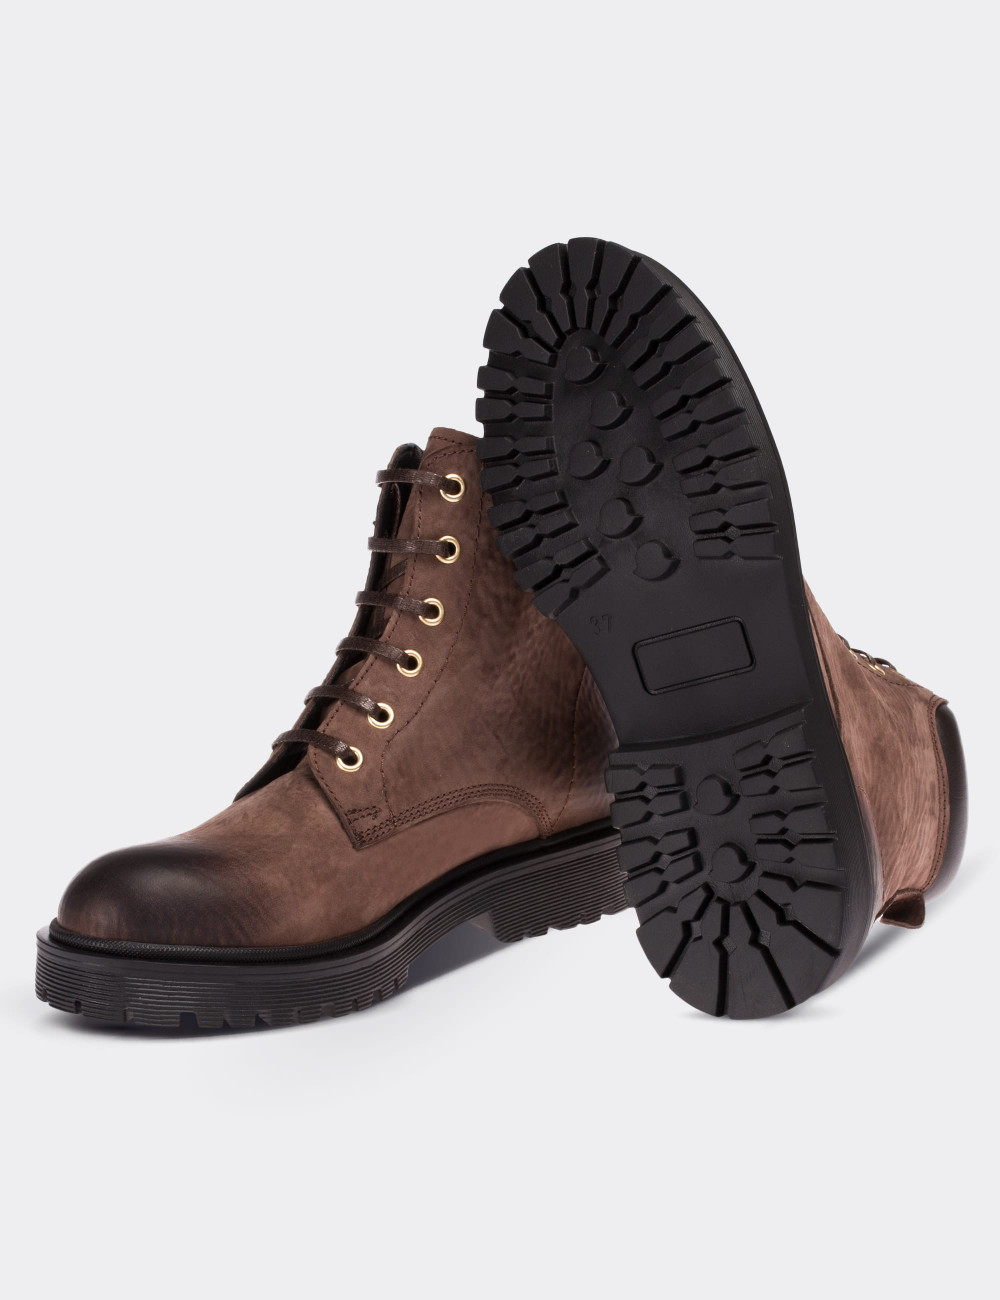 Brown Nubuck Leather  Boots - 01808ZKHVC01